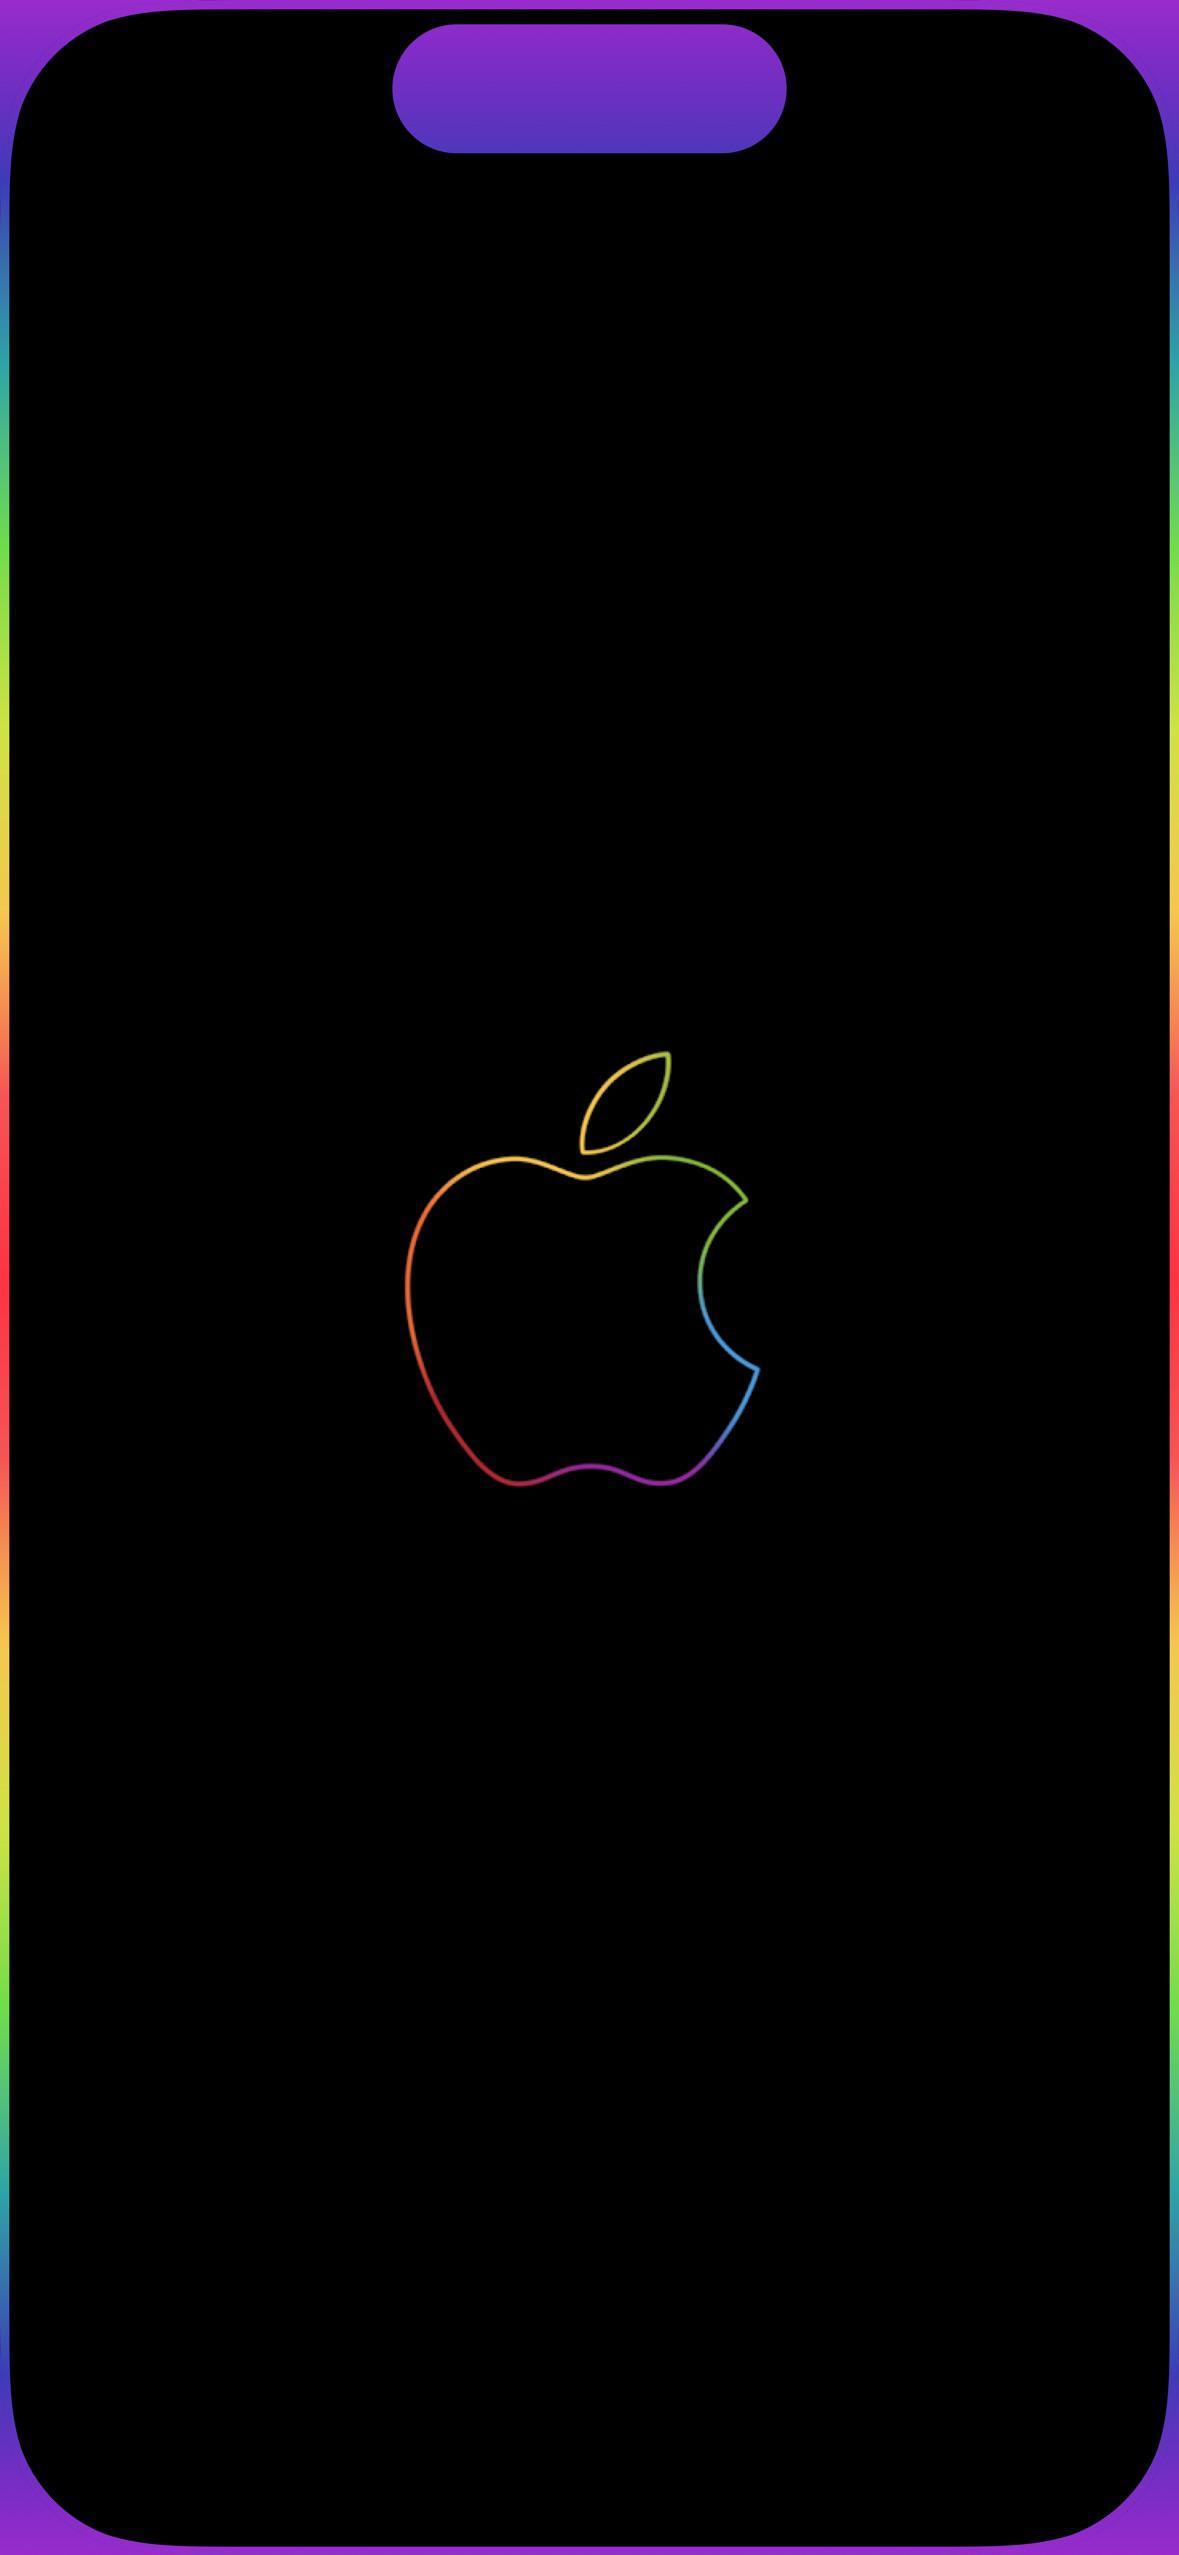 iPhone Pro Neon Border Wallpaper Yup You Are Wele R